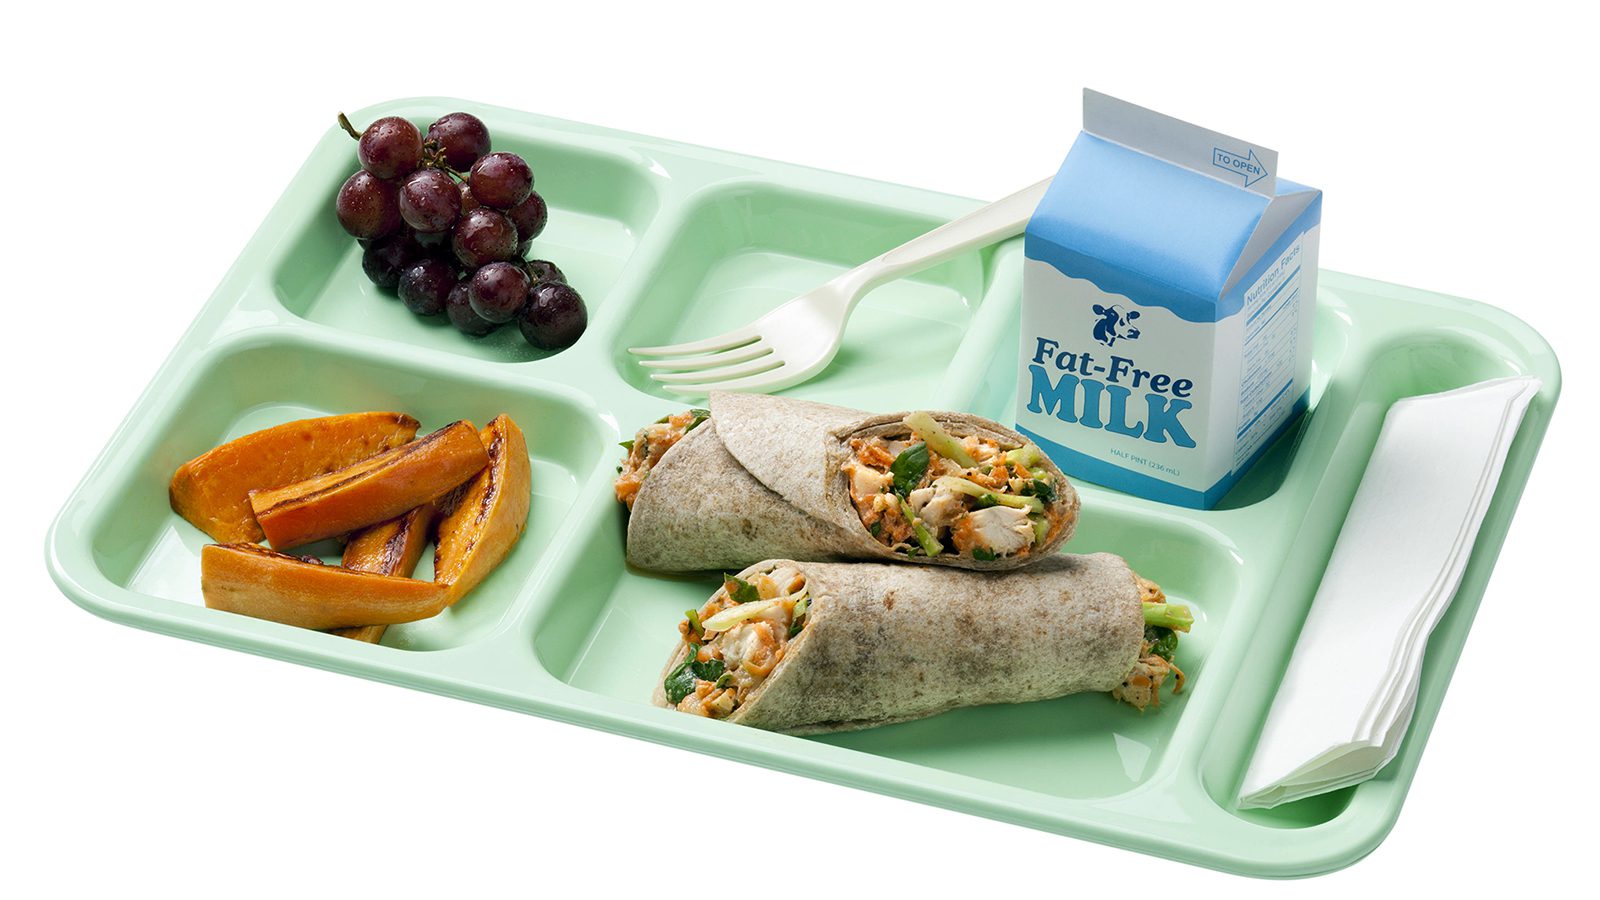 A school lunch tray showing a reimbursable meal for grades kindergarten through 8. Photo by USDA/Flickr/Creative Commons